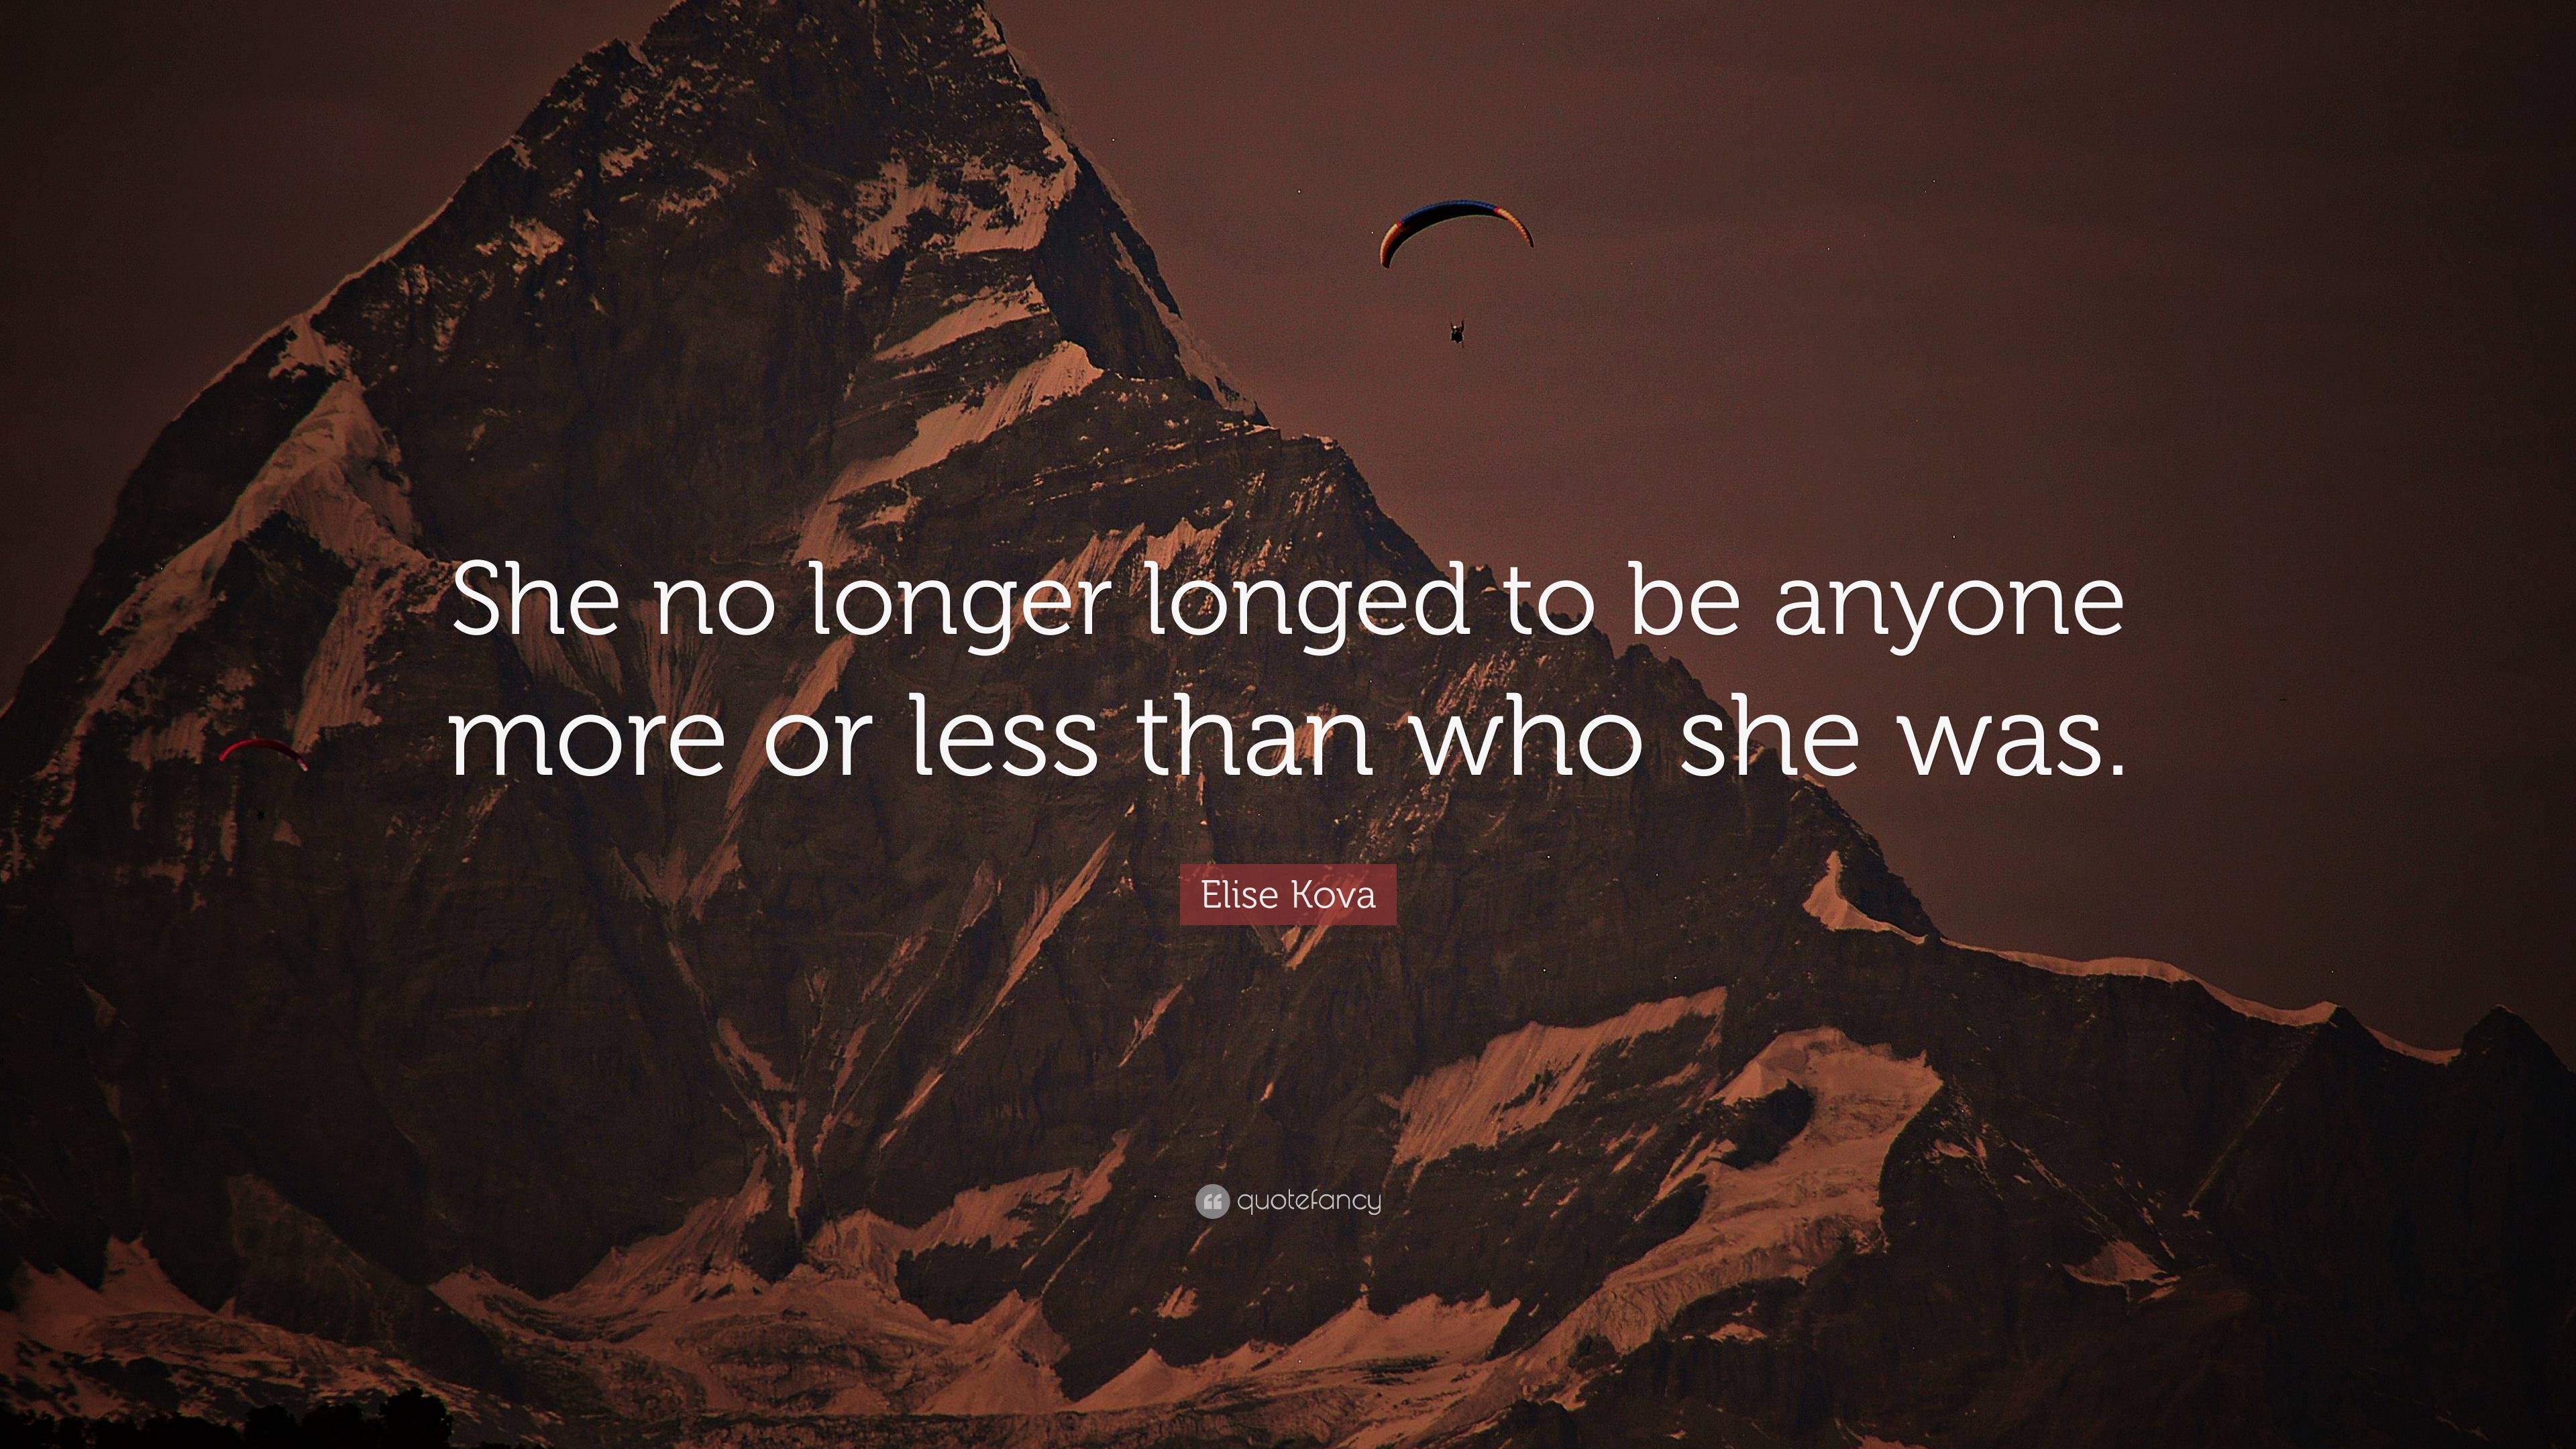 Elise Kova Quote: “She no longer longed to be anyone more or less than ...